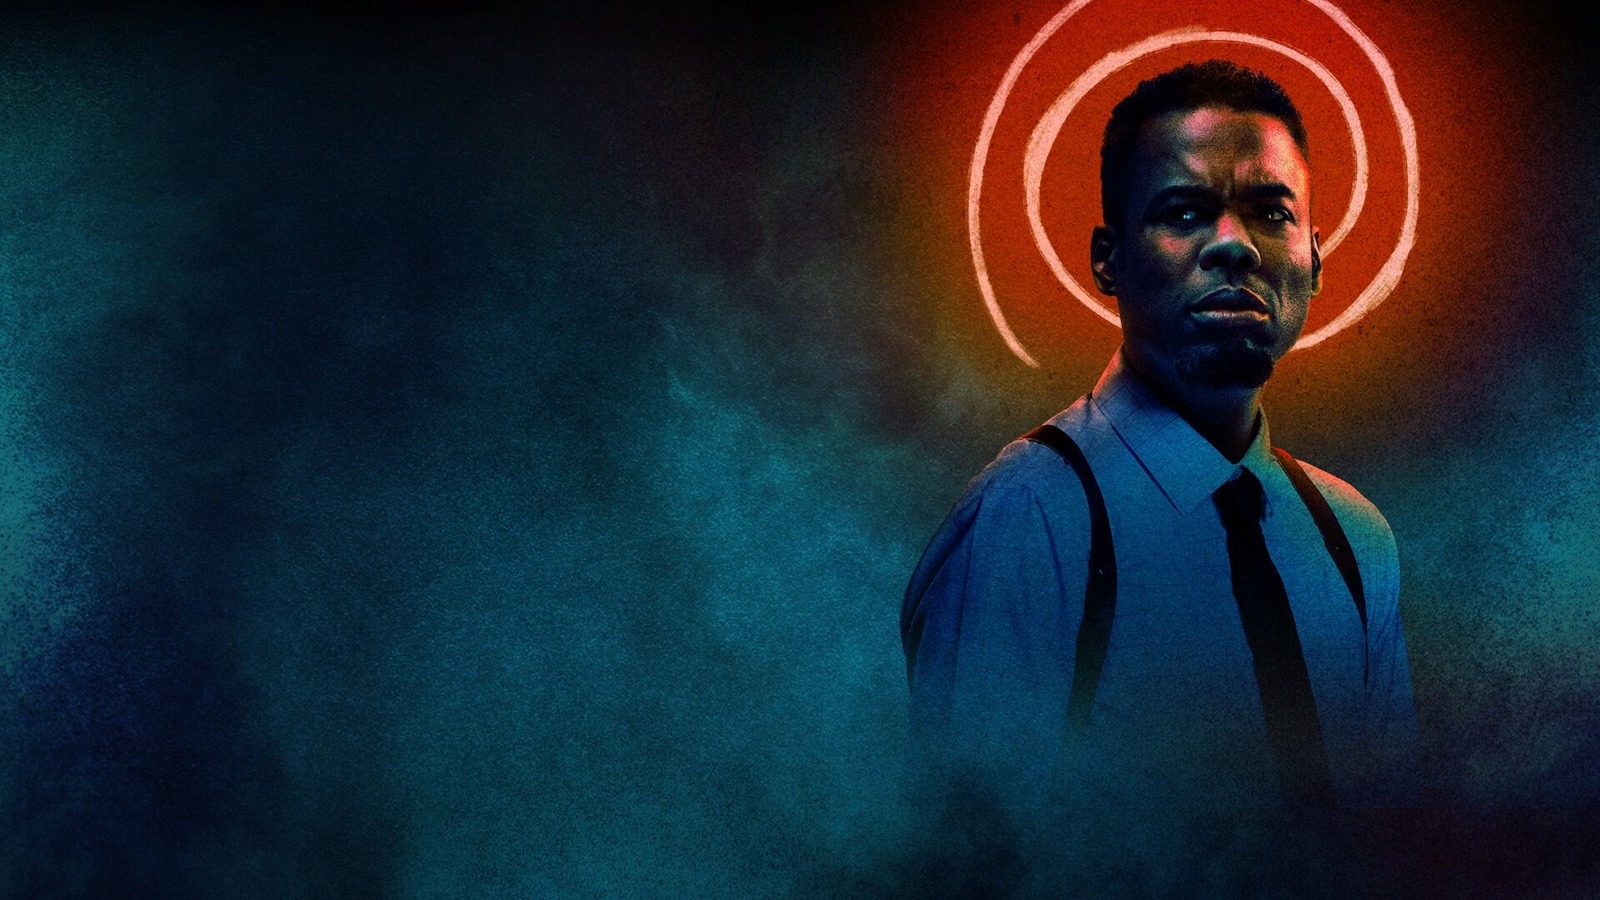 Spiral a Saw Reboot Starring Chris Rock Gets Teaser Trailer and Poster